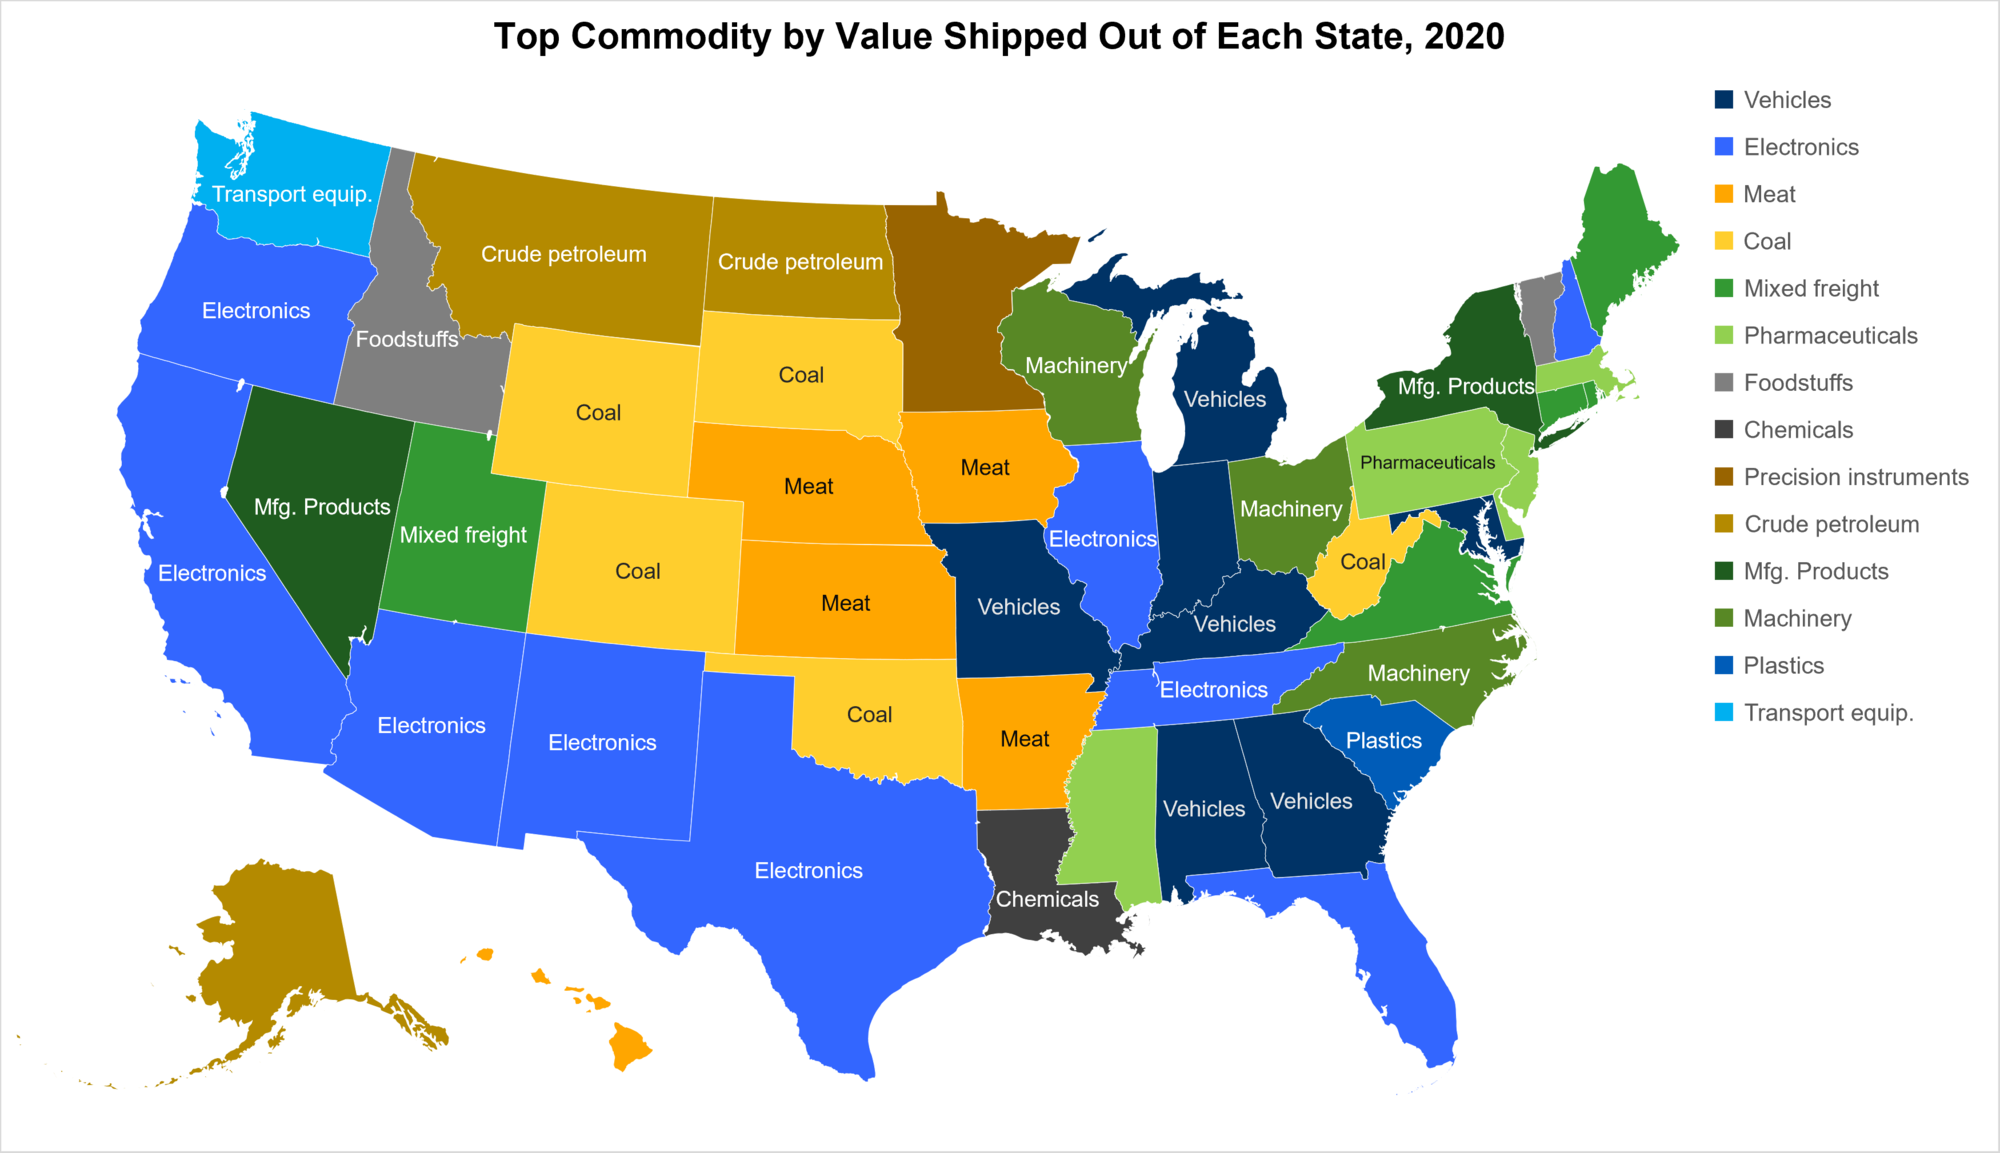 Top Commodity by Value Shipped Out of Each State, 2020